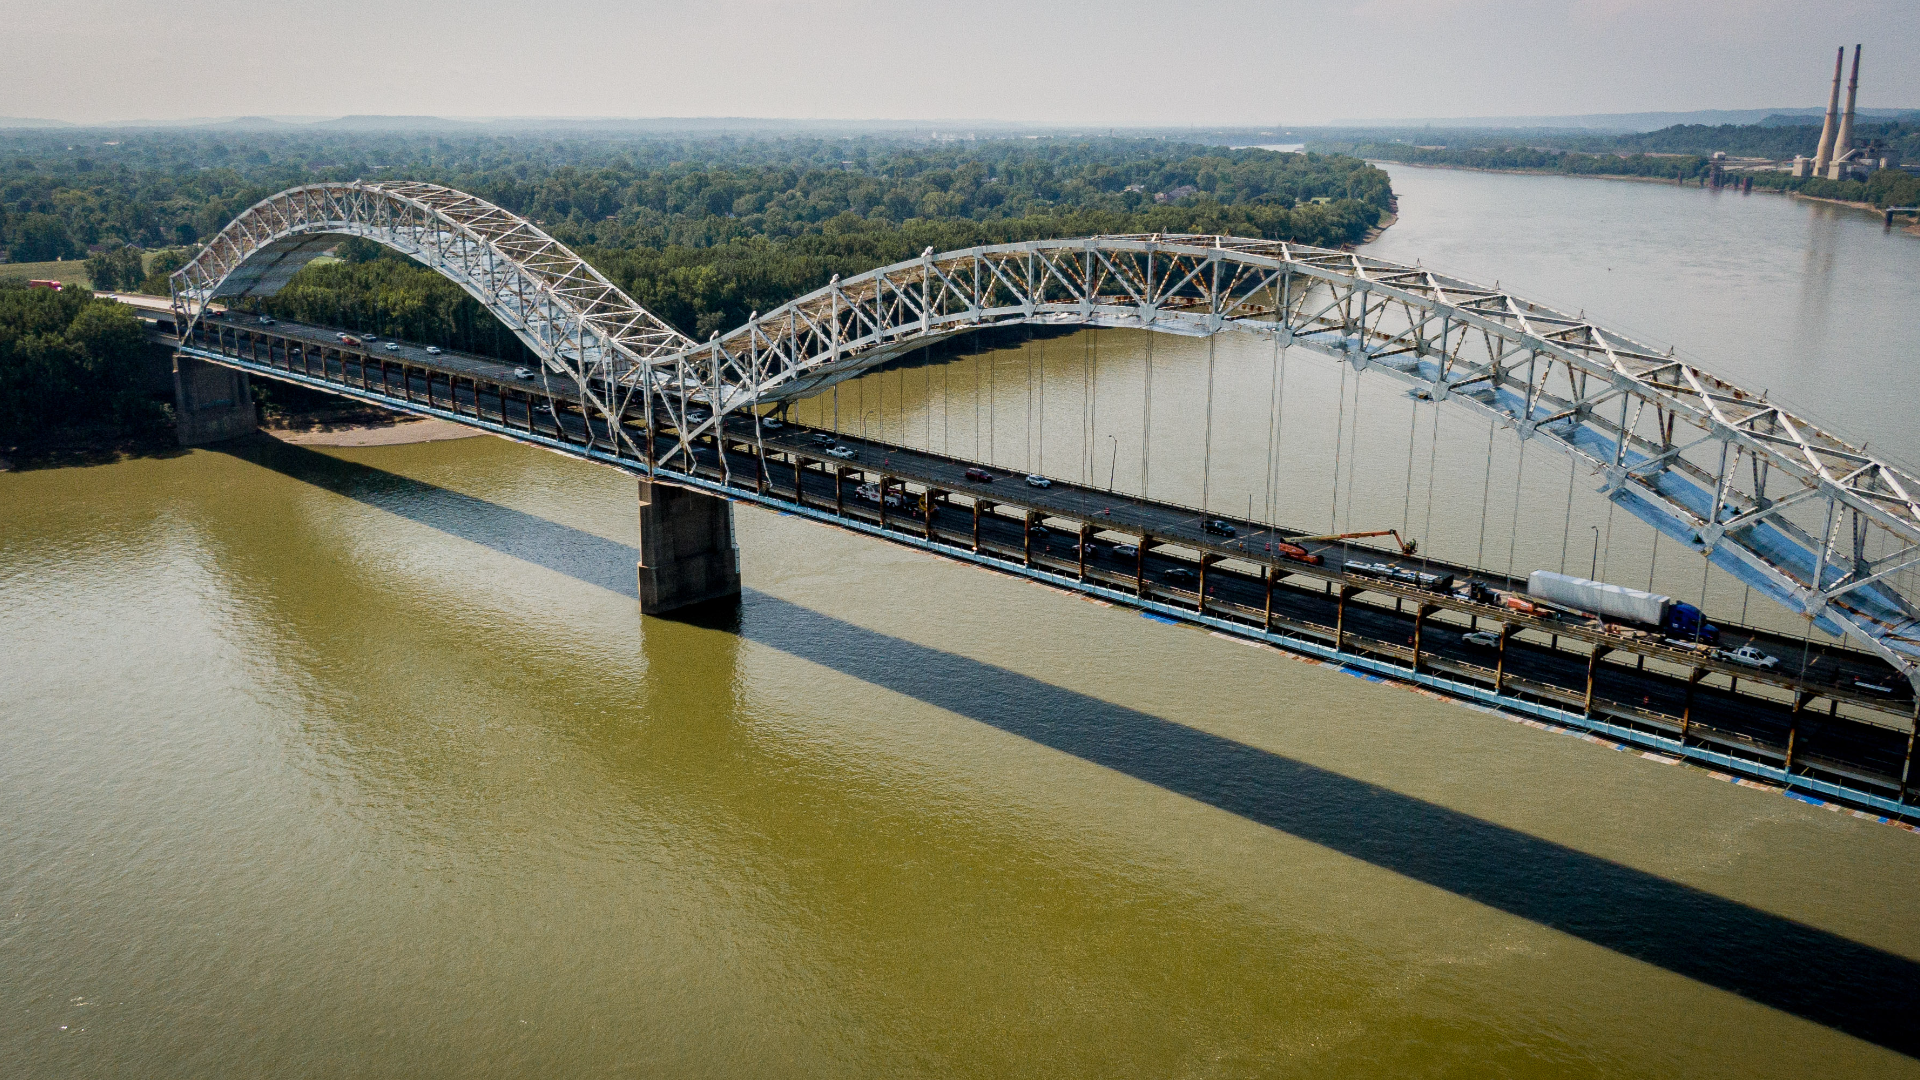 All westbound lanes of I-64 across the bridge will be closed for nine days starting Oct. 25.